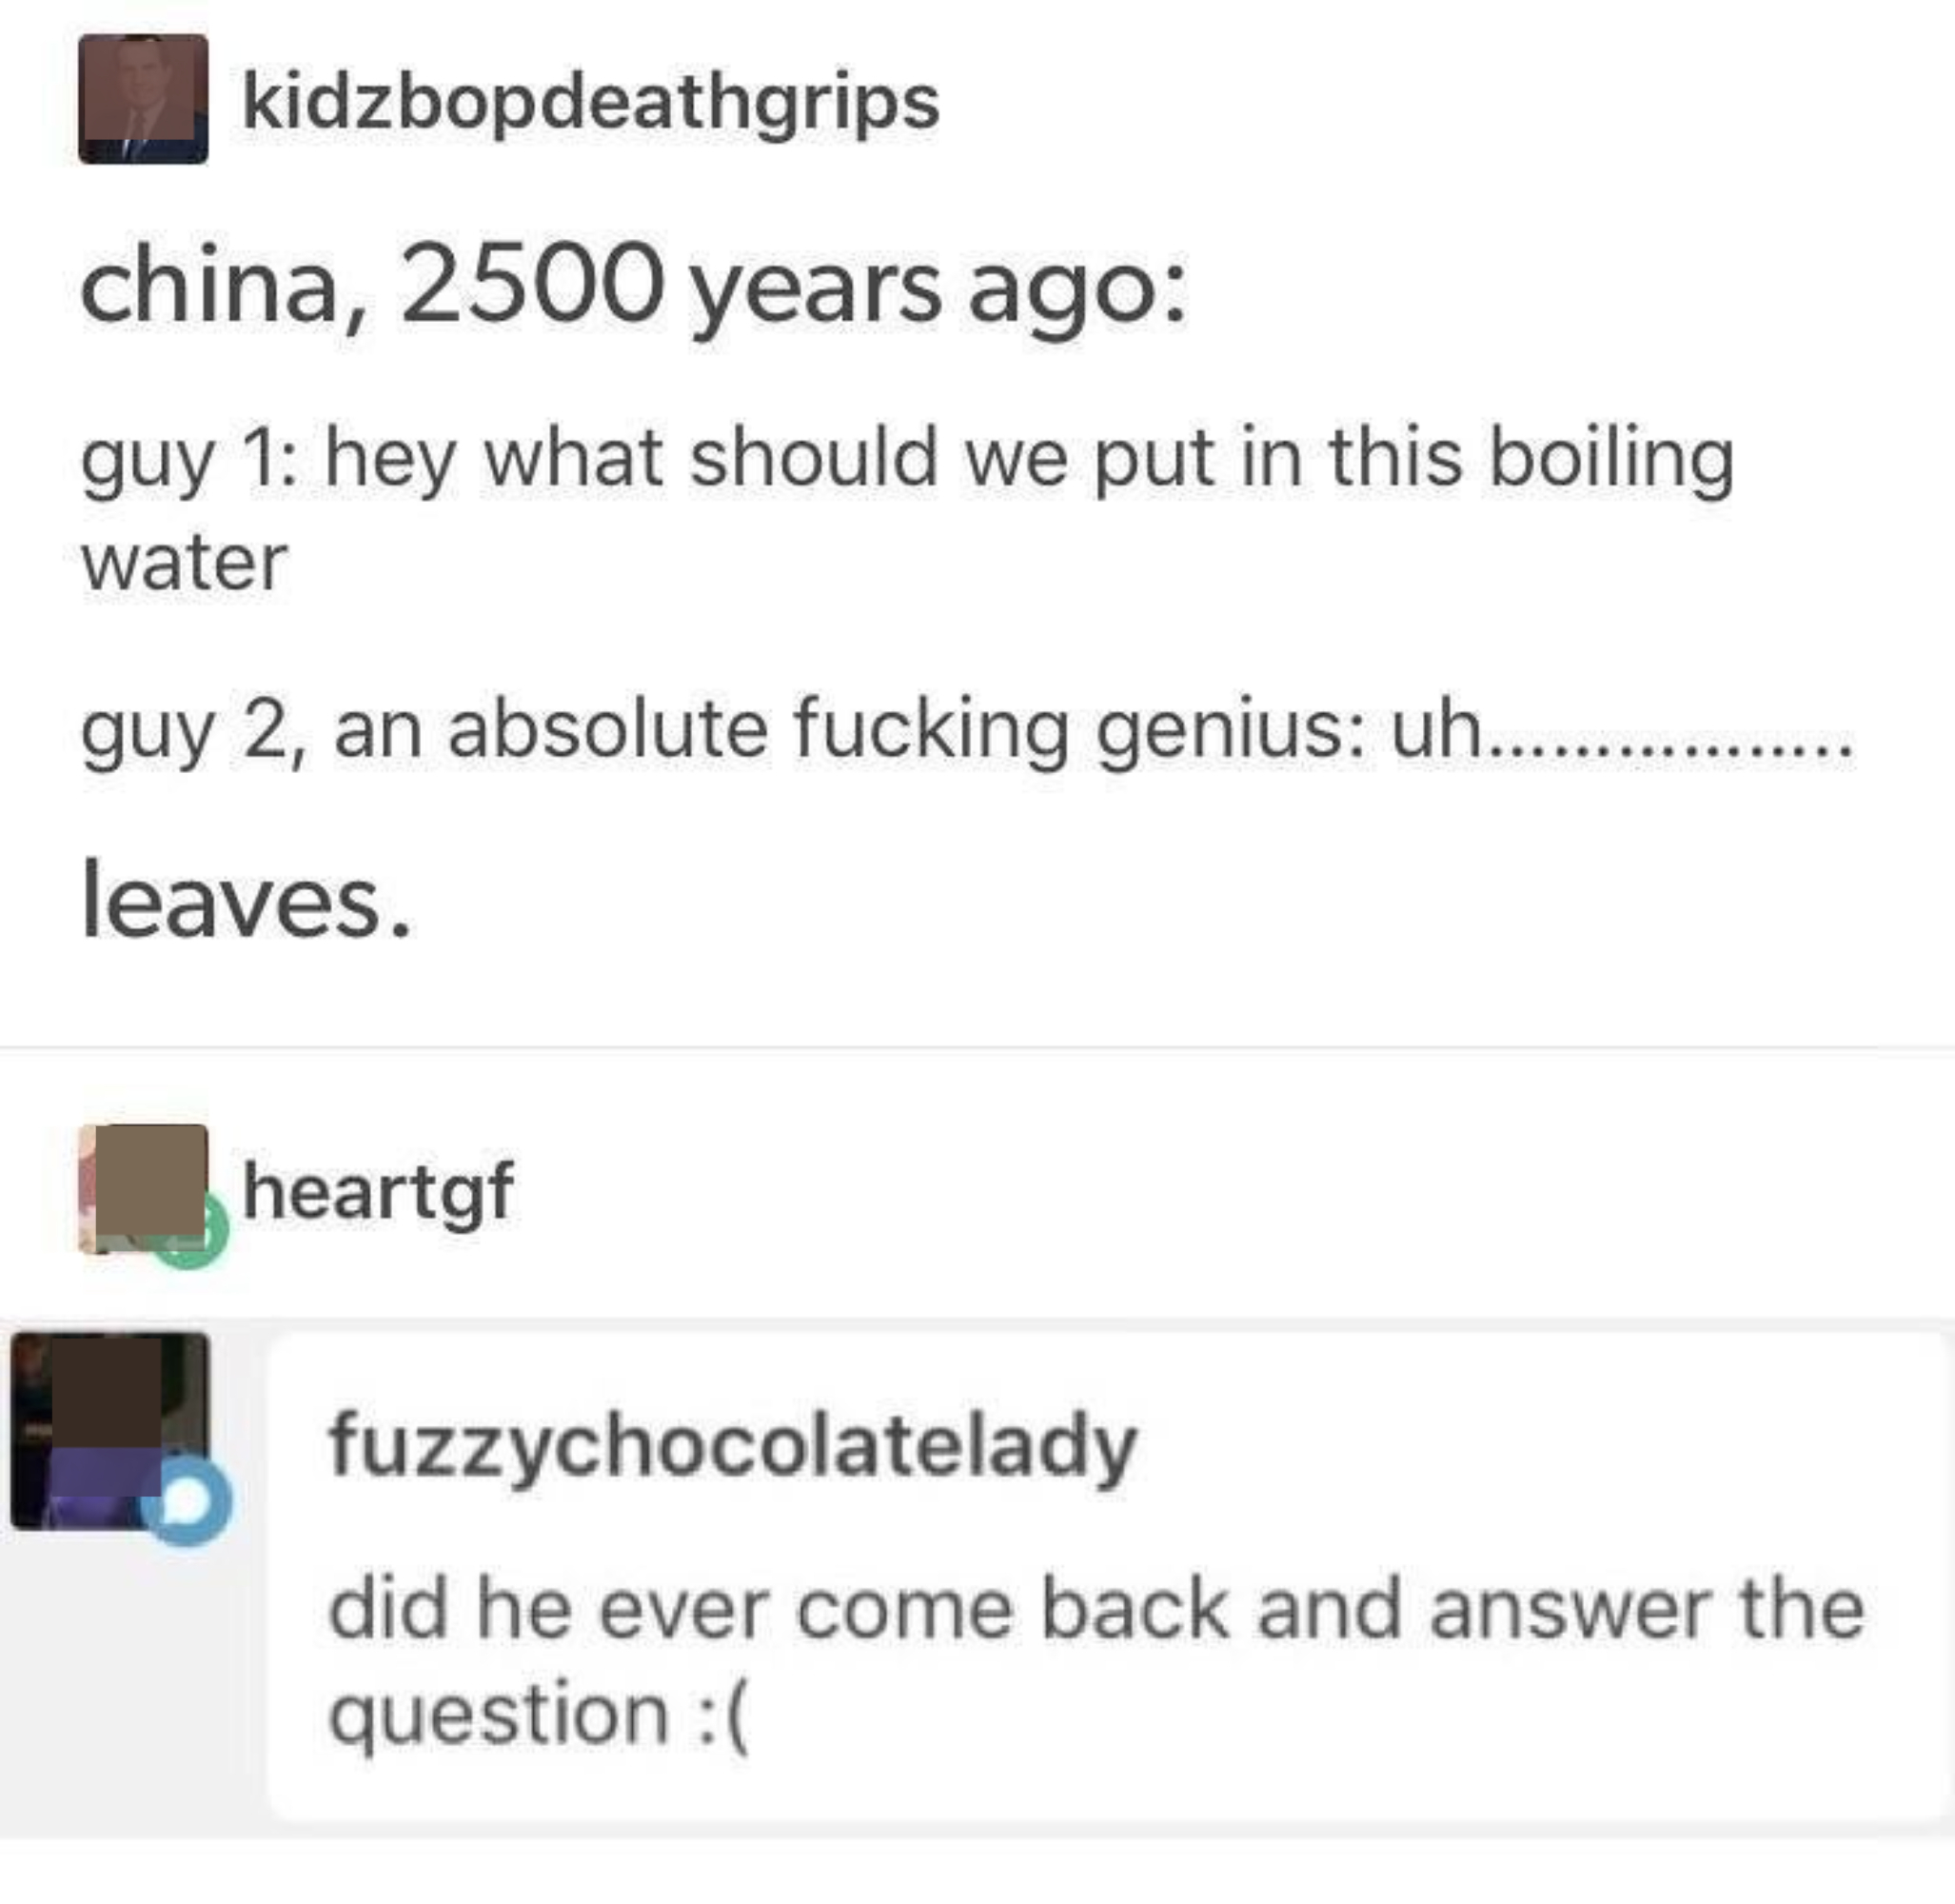 &quot;China, 2,500 years ago: guy 1: hey what should we put in this boiling water; guy 2, an absolute fucking genius: uh, leaves&quot;; response: &quot;did he ever come back and answer the question&quot;